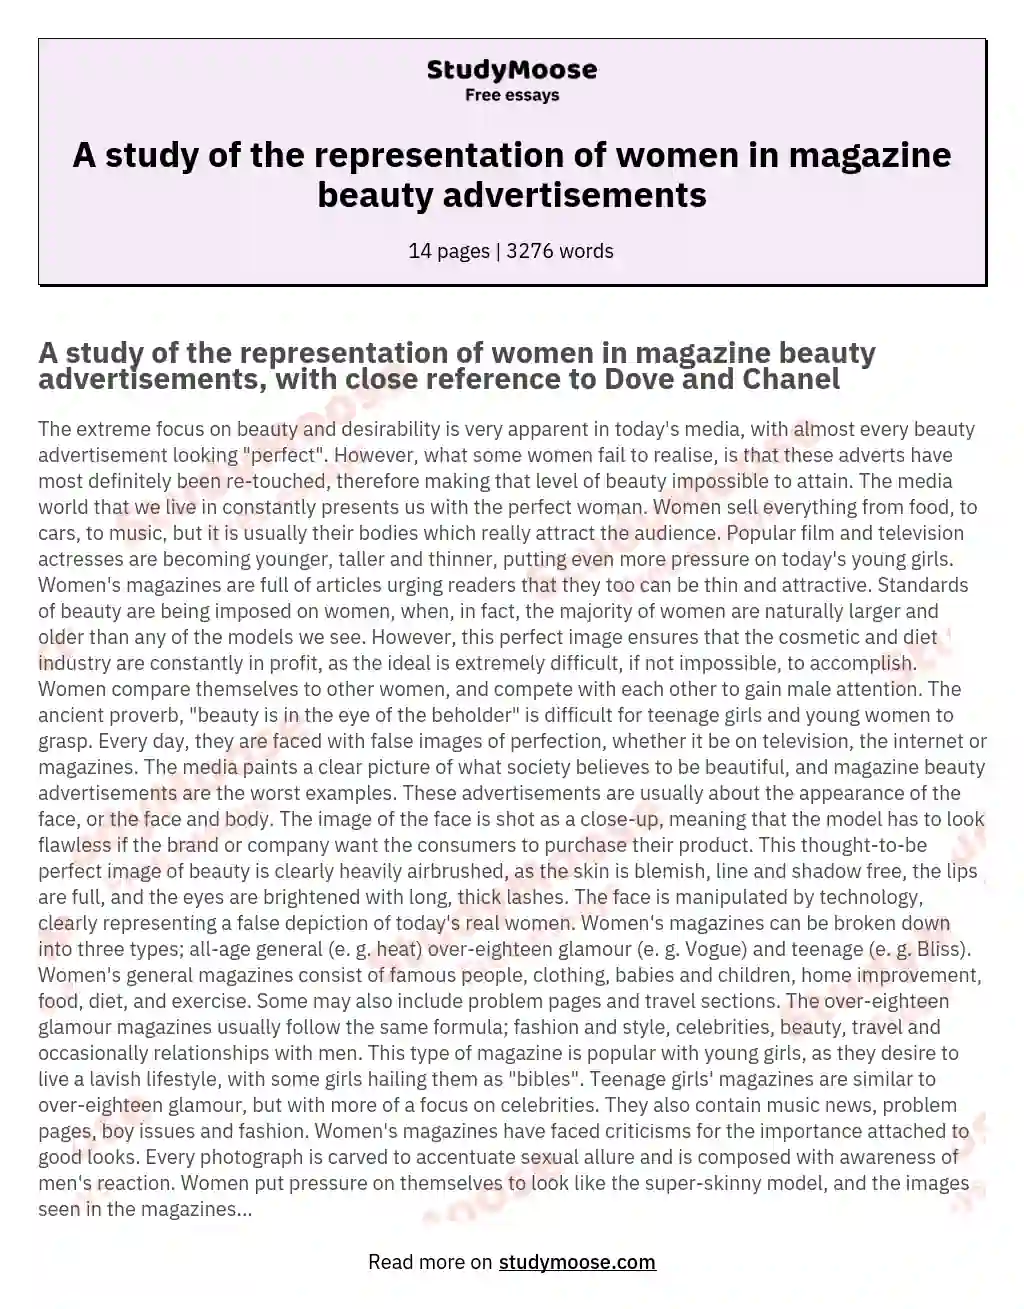 A study of the representation of women in magazine beauty advertisements essay